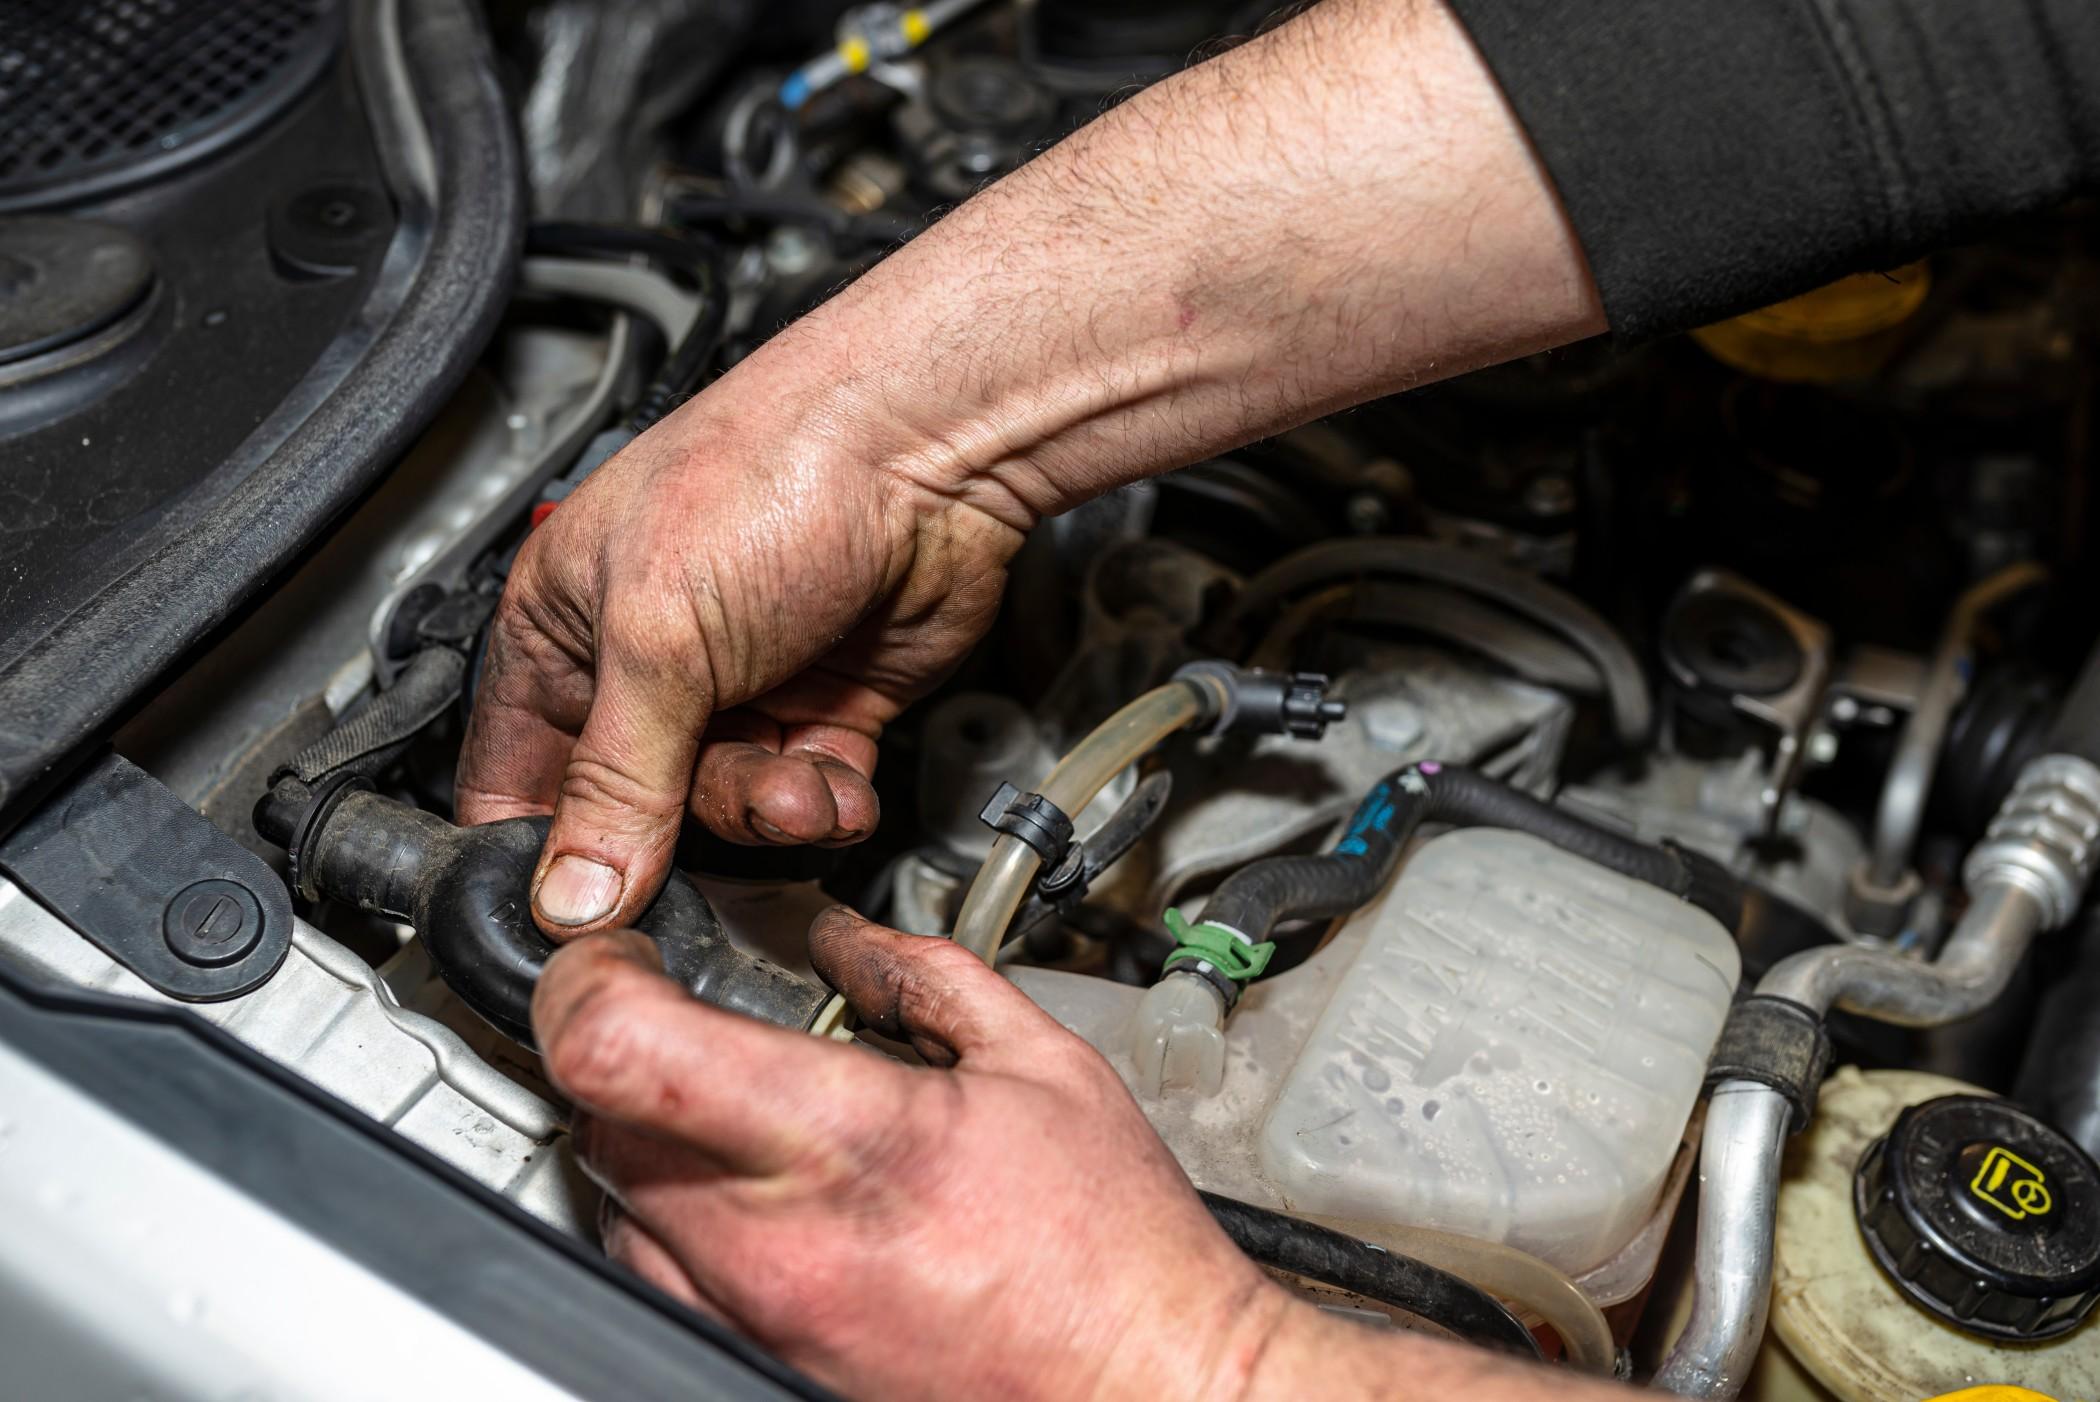 Keeping your fuel system clean can help extend the life of your car.